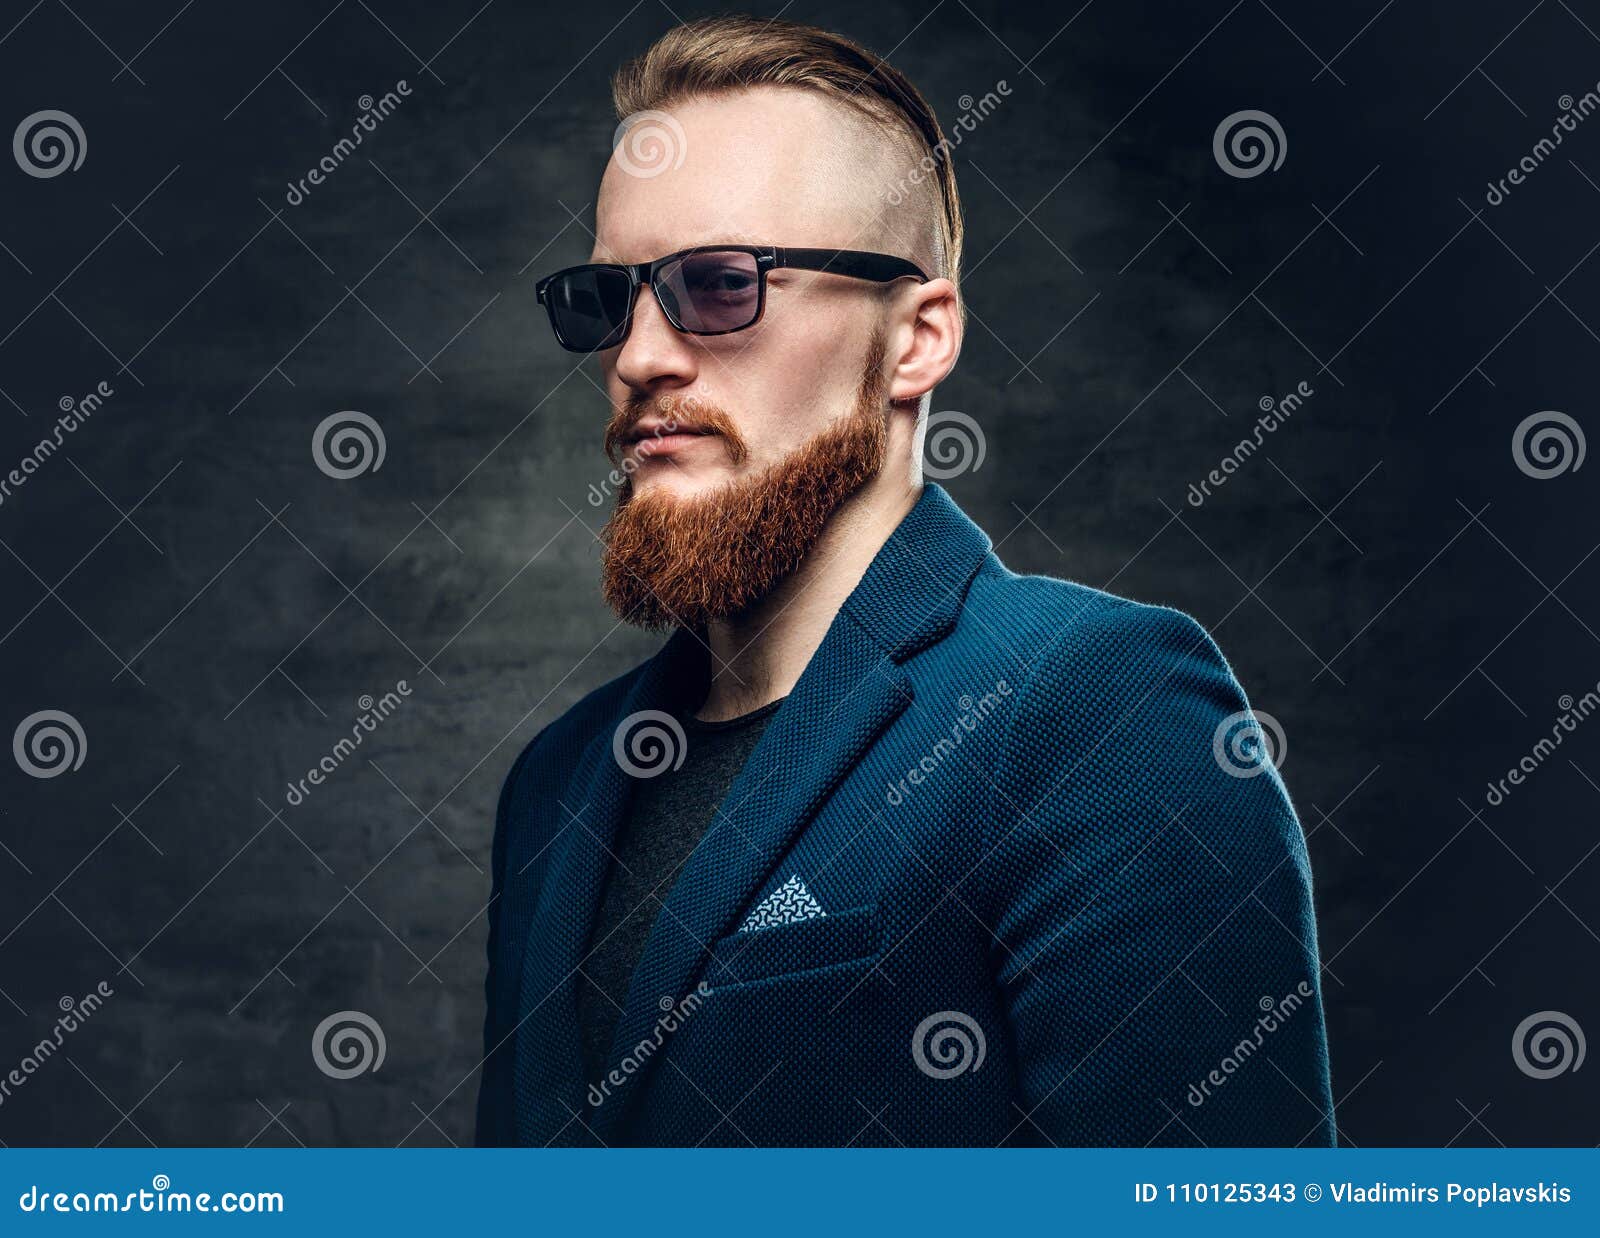 Redhead Bearded Hipster Male Dressed in a Blue Jacket. Stock Image ...